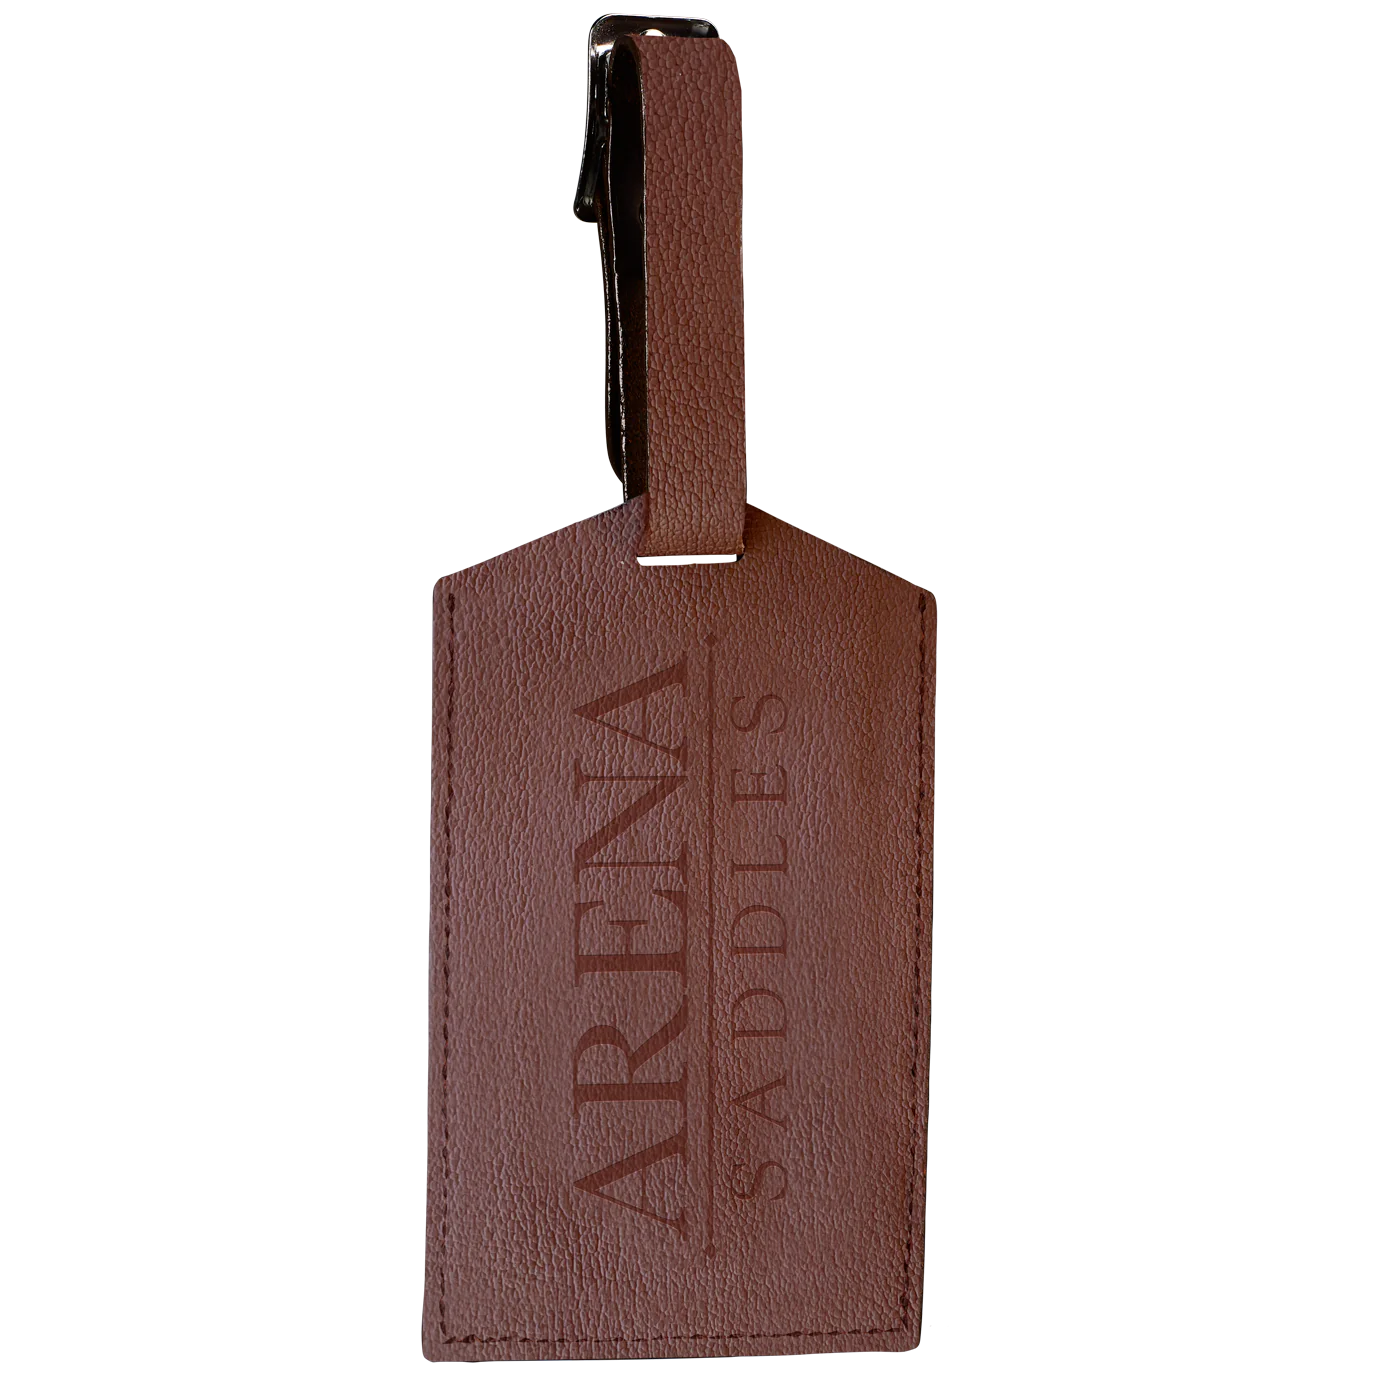 Arena Leather Luggage Tag